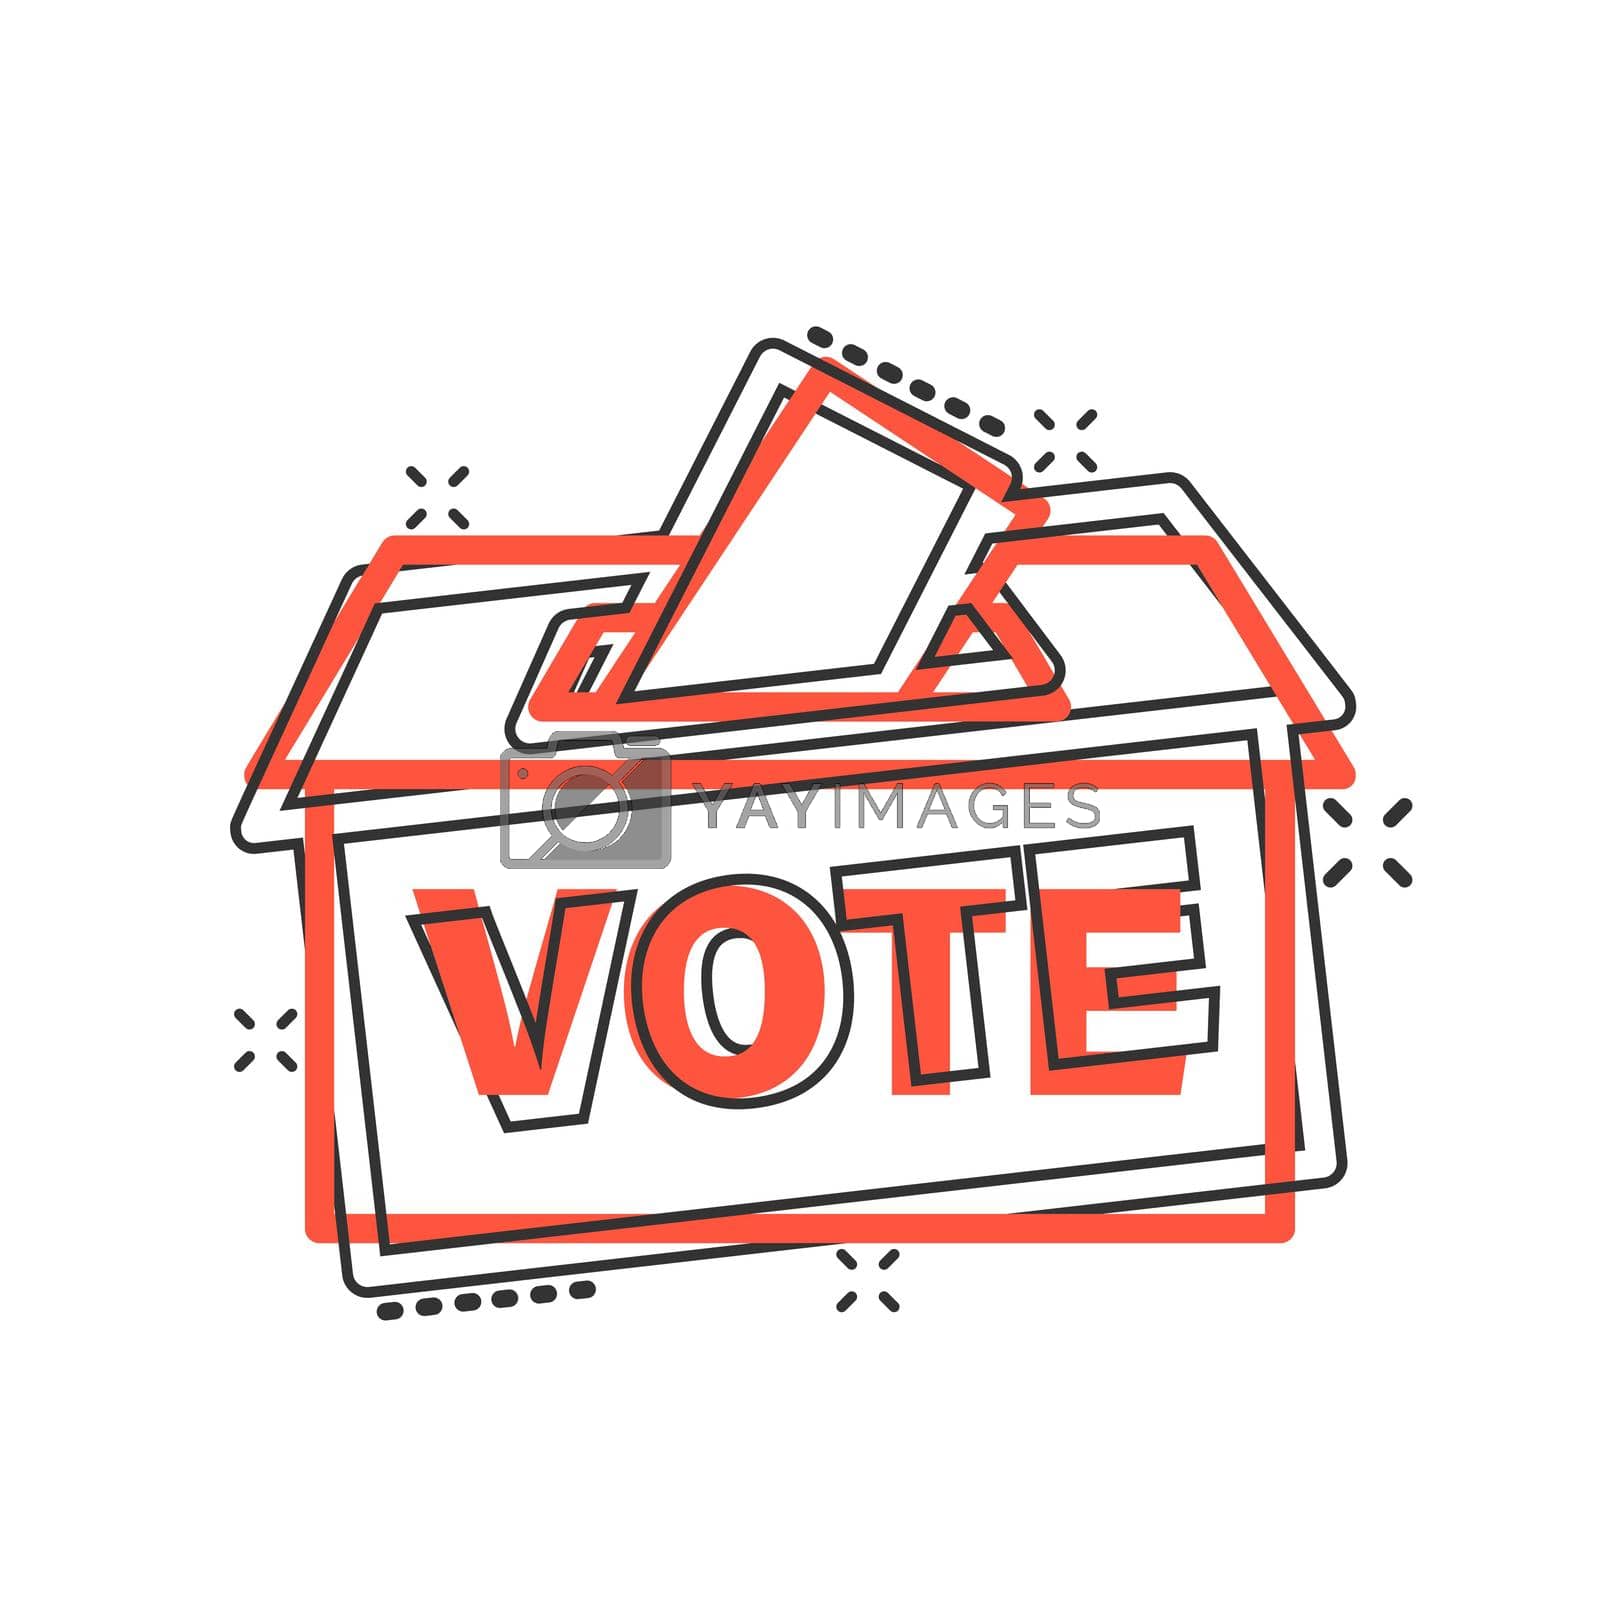 Royalty free image of Election voter box icon in comic style. Ballot suggestion vector cartoon illustration pictogram splash effect. by LysenkoA